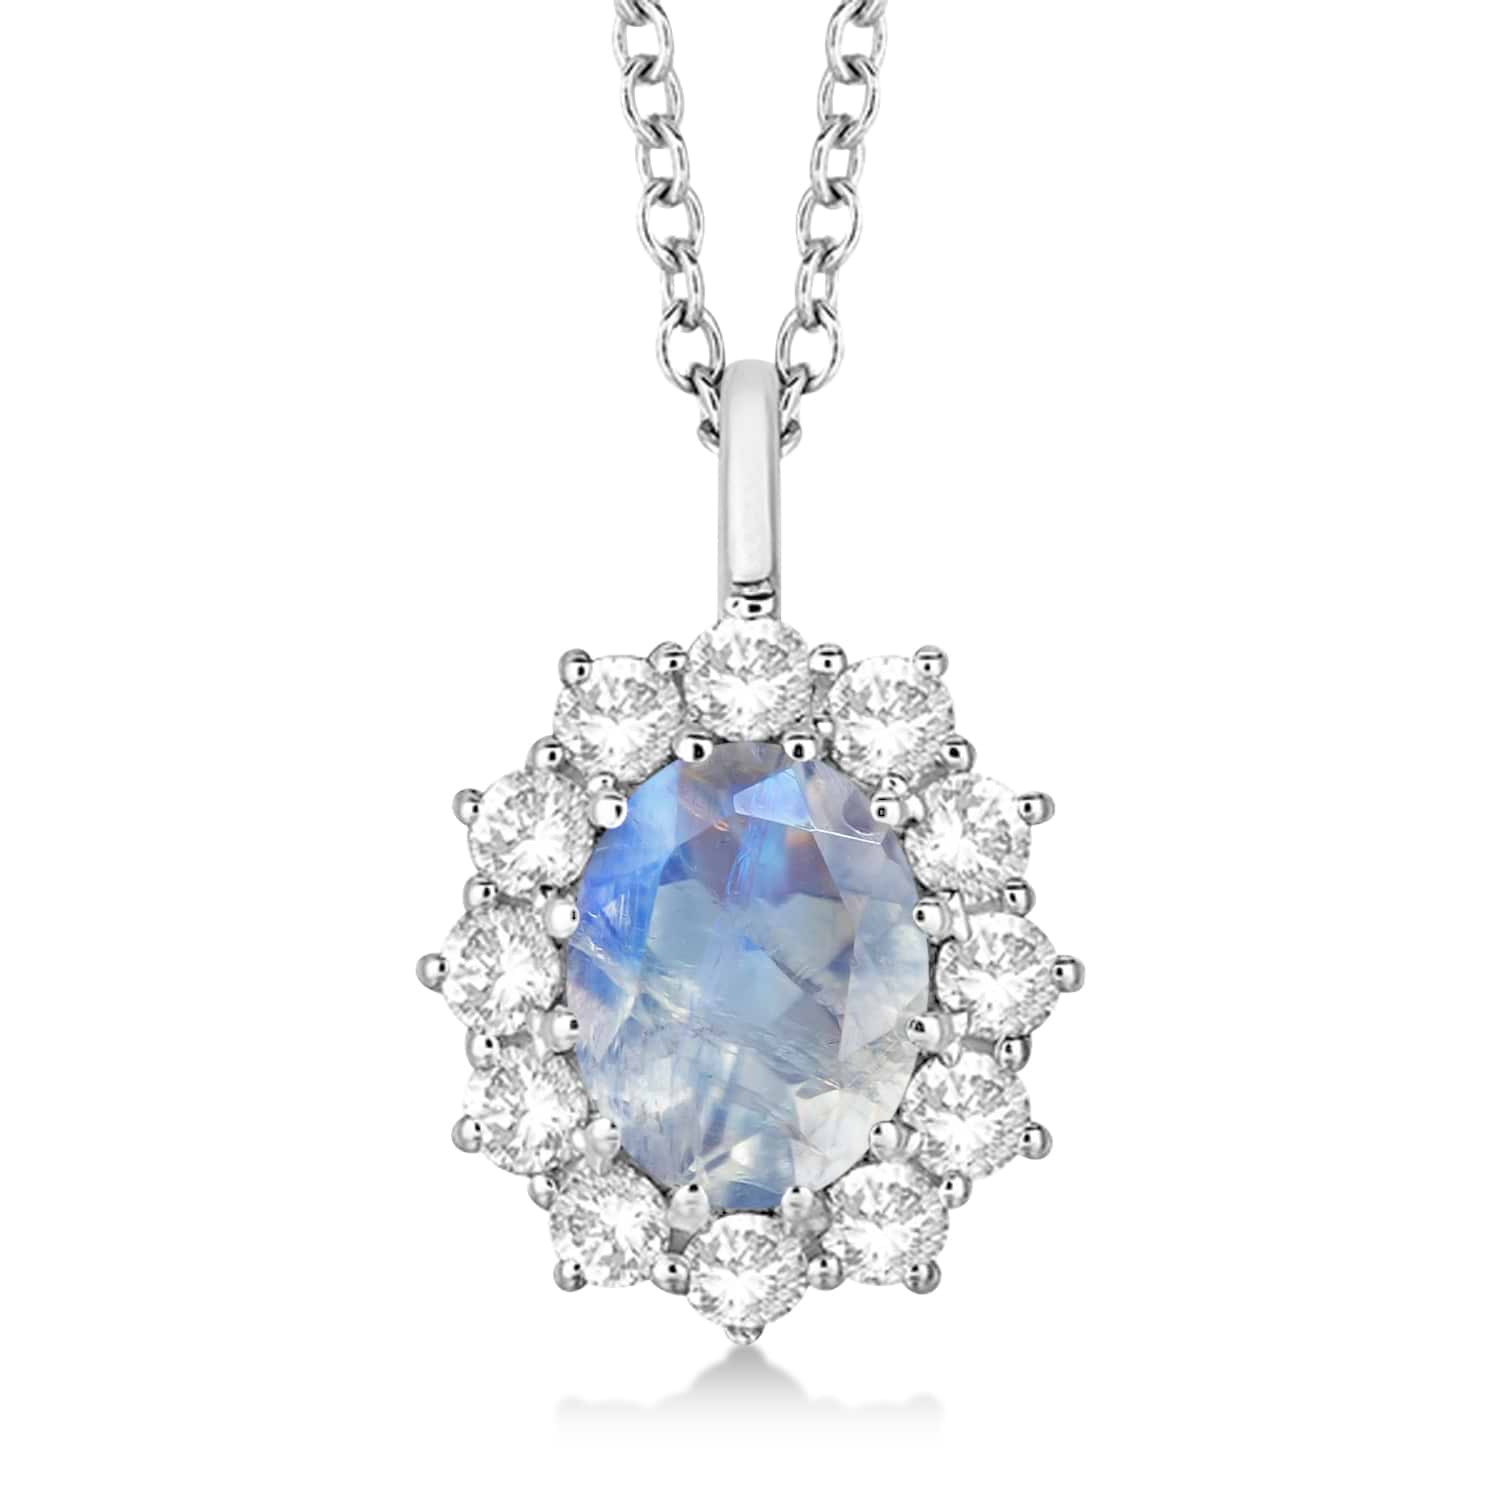 Oval Moonstone and Diamond Pendant Necklace 14k White Gold (2.80ctw)